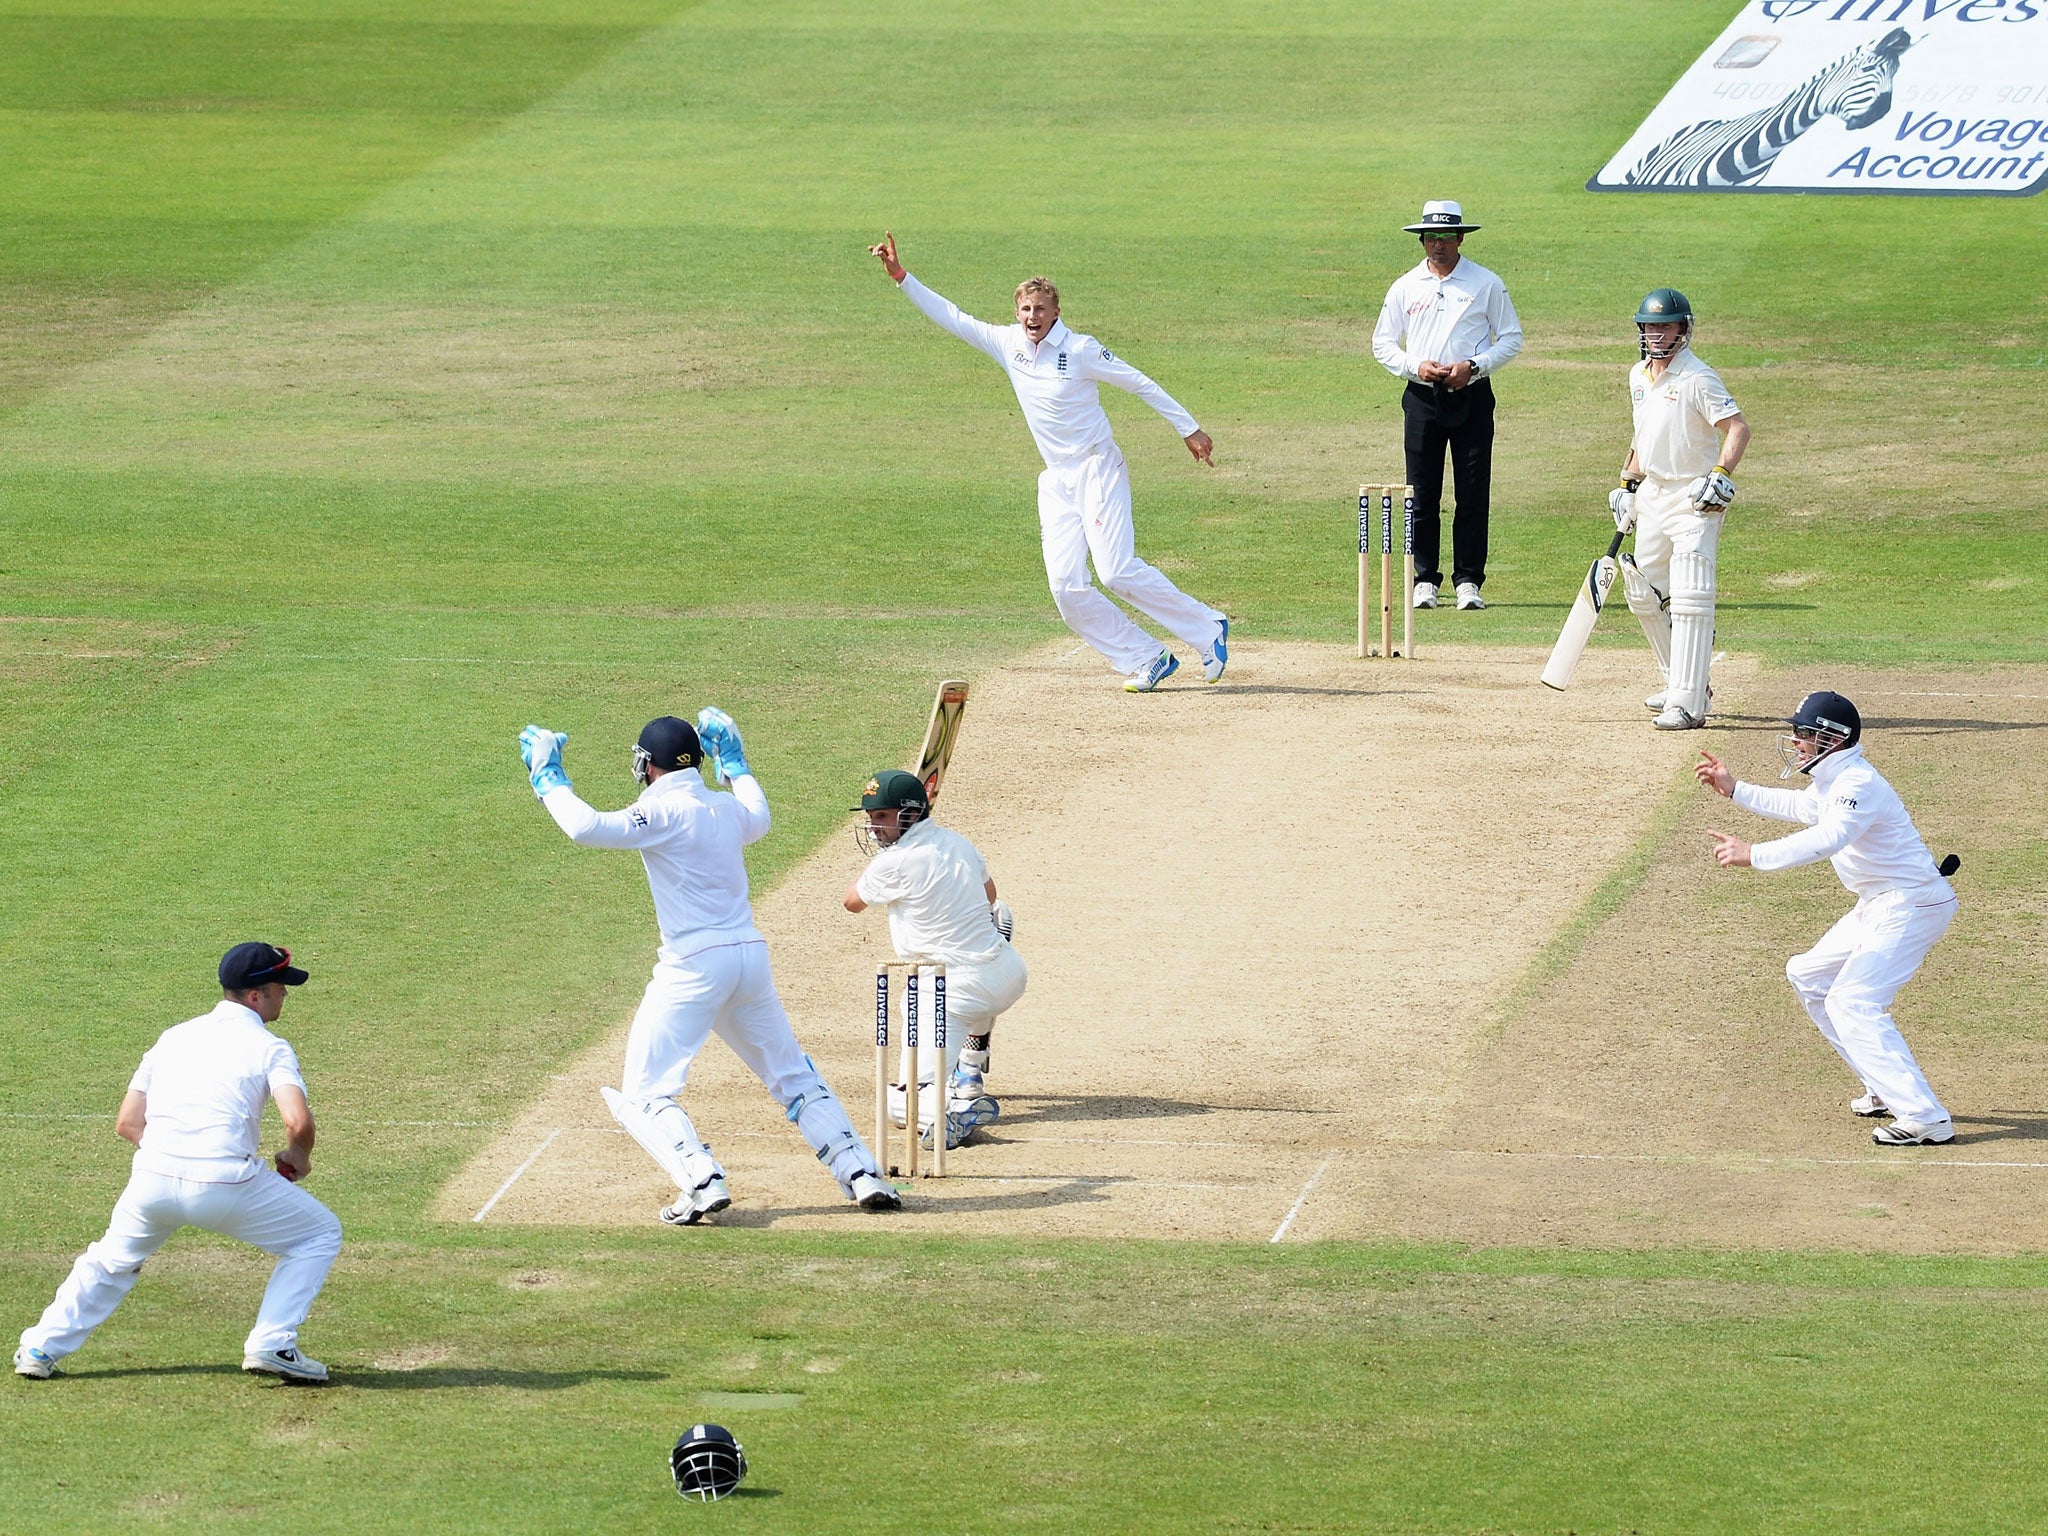 Root to success: Ed Cowan edges a delivery from Joe Root to Jonathan Trott at slip to the delight of the fielders